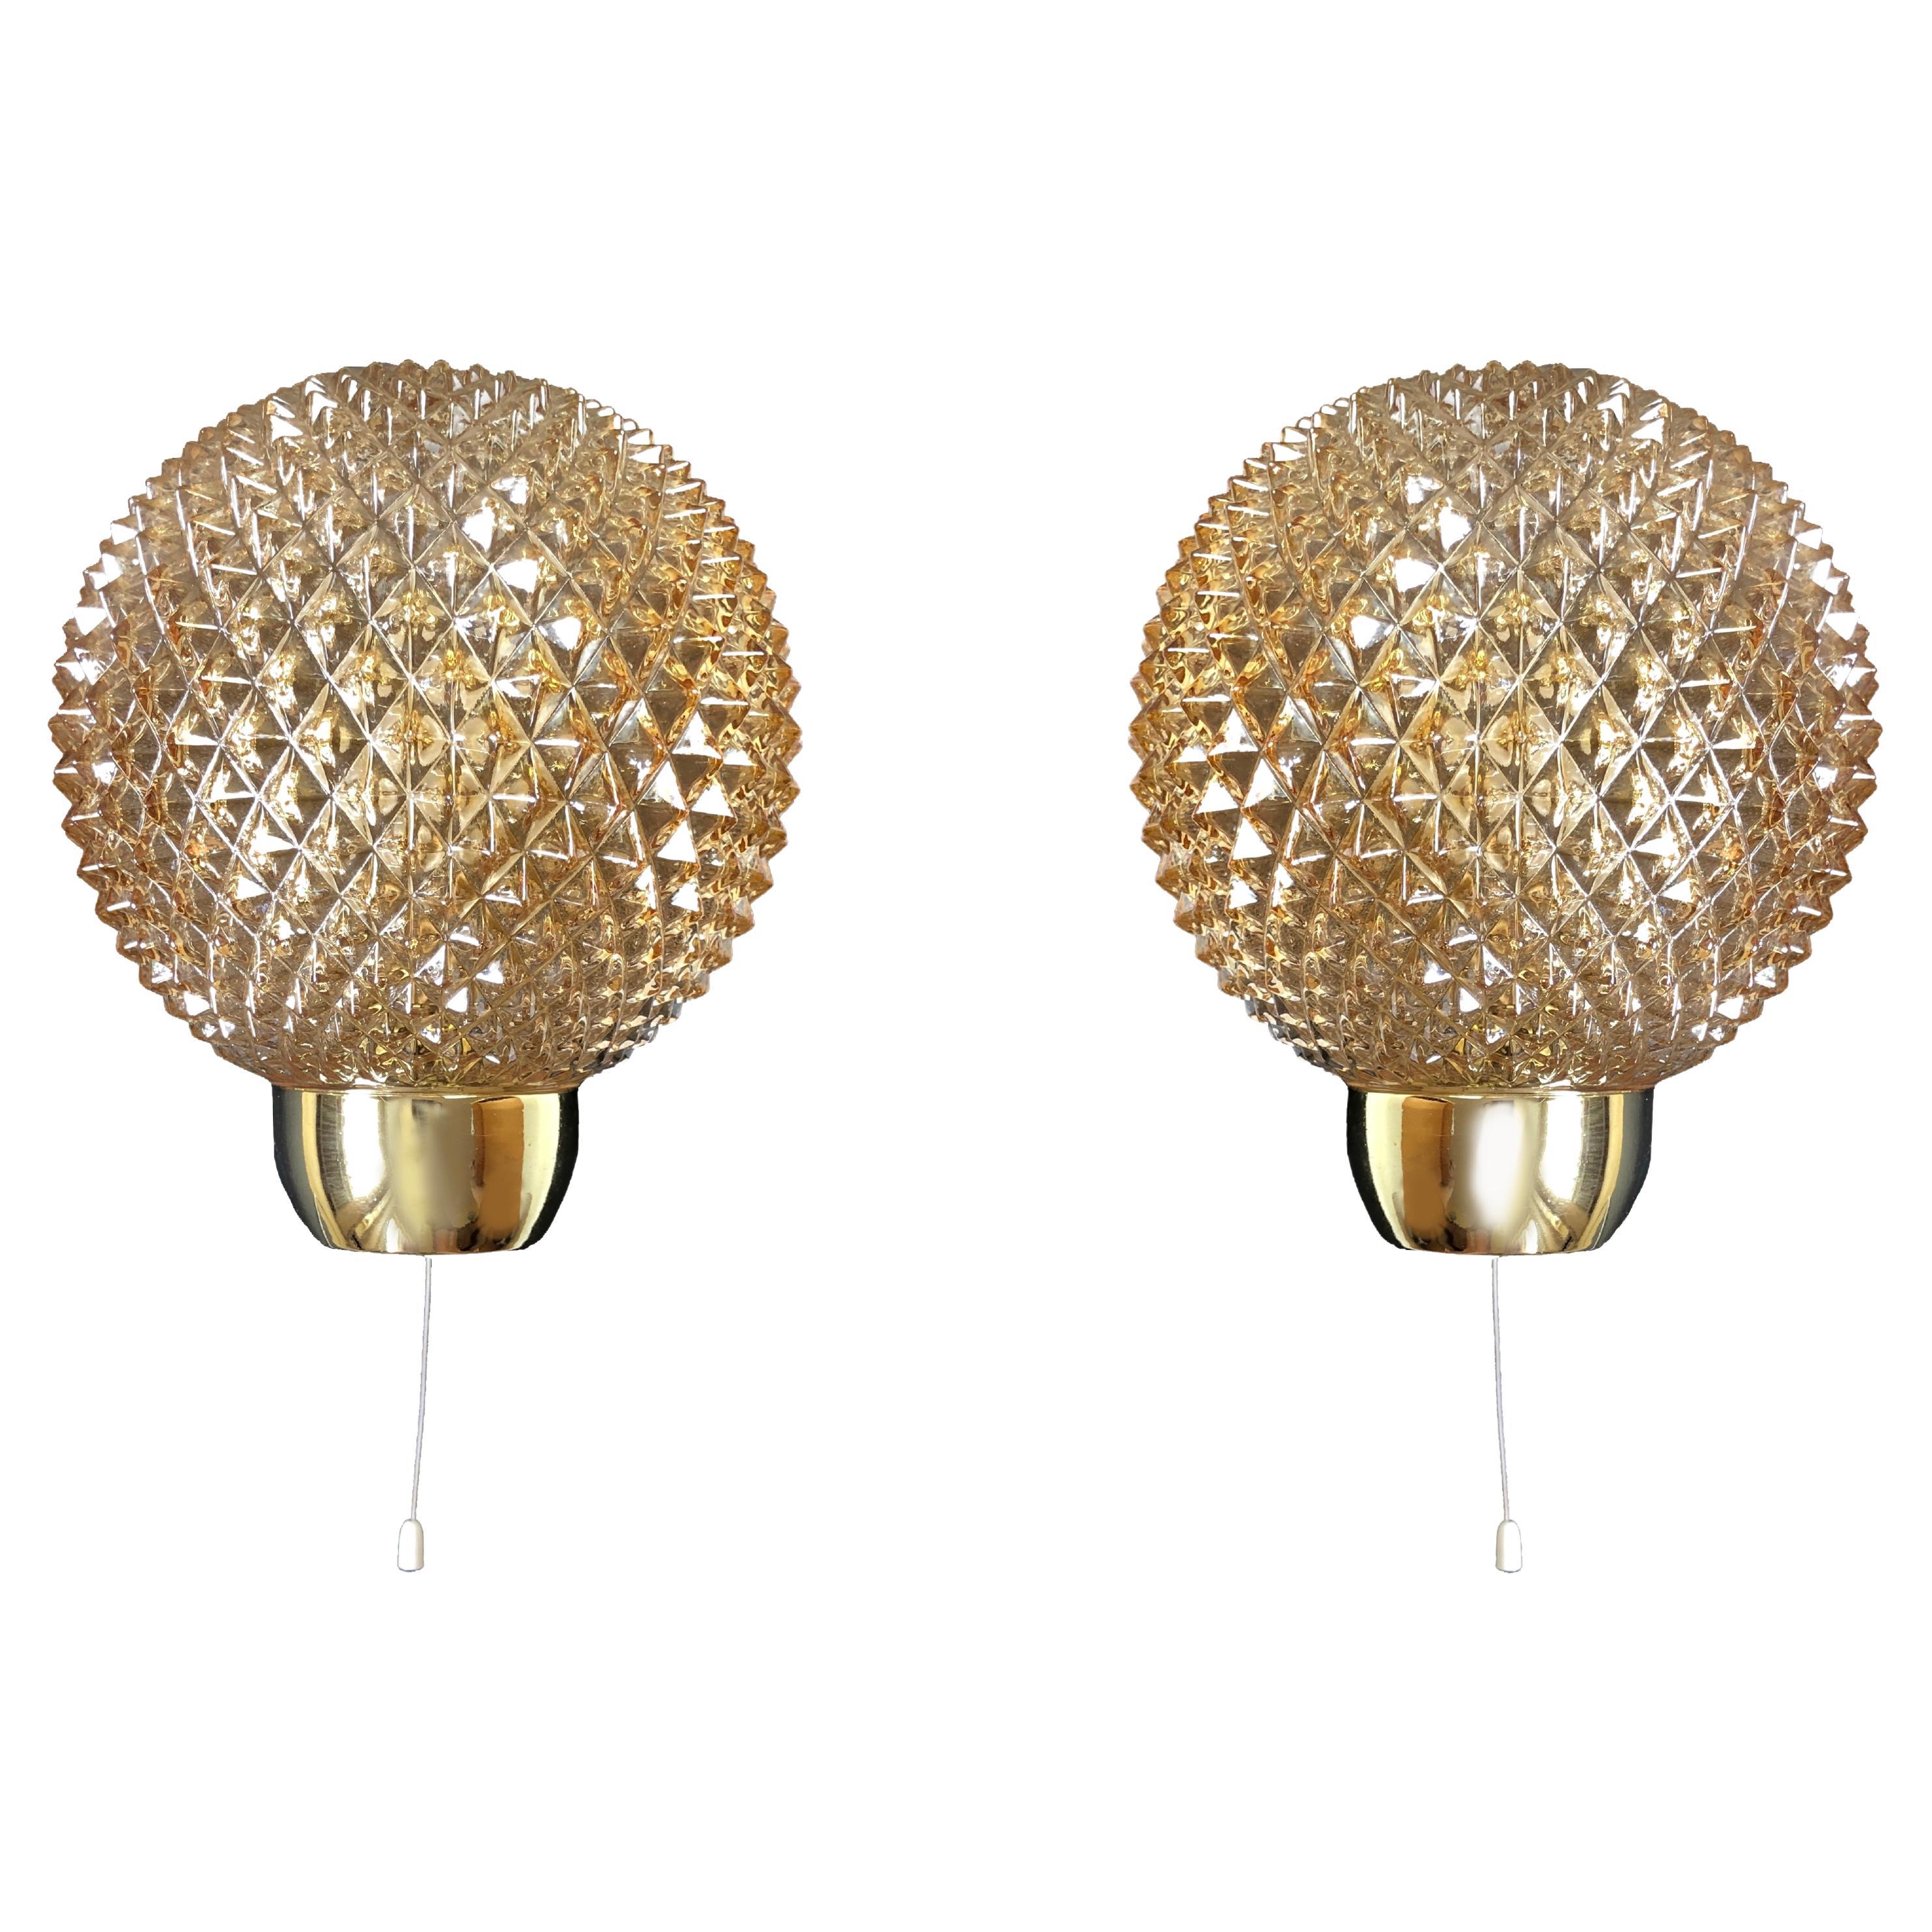 Mid-Century Set of Wall Lamps Spiky Spheres, Amber Glow by RZB, Germany, 1980s For Sale